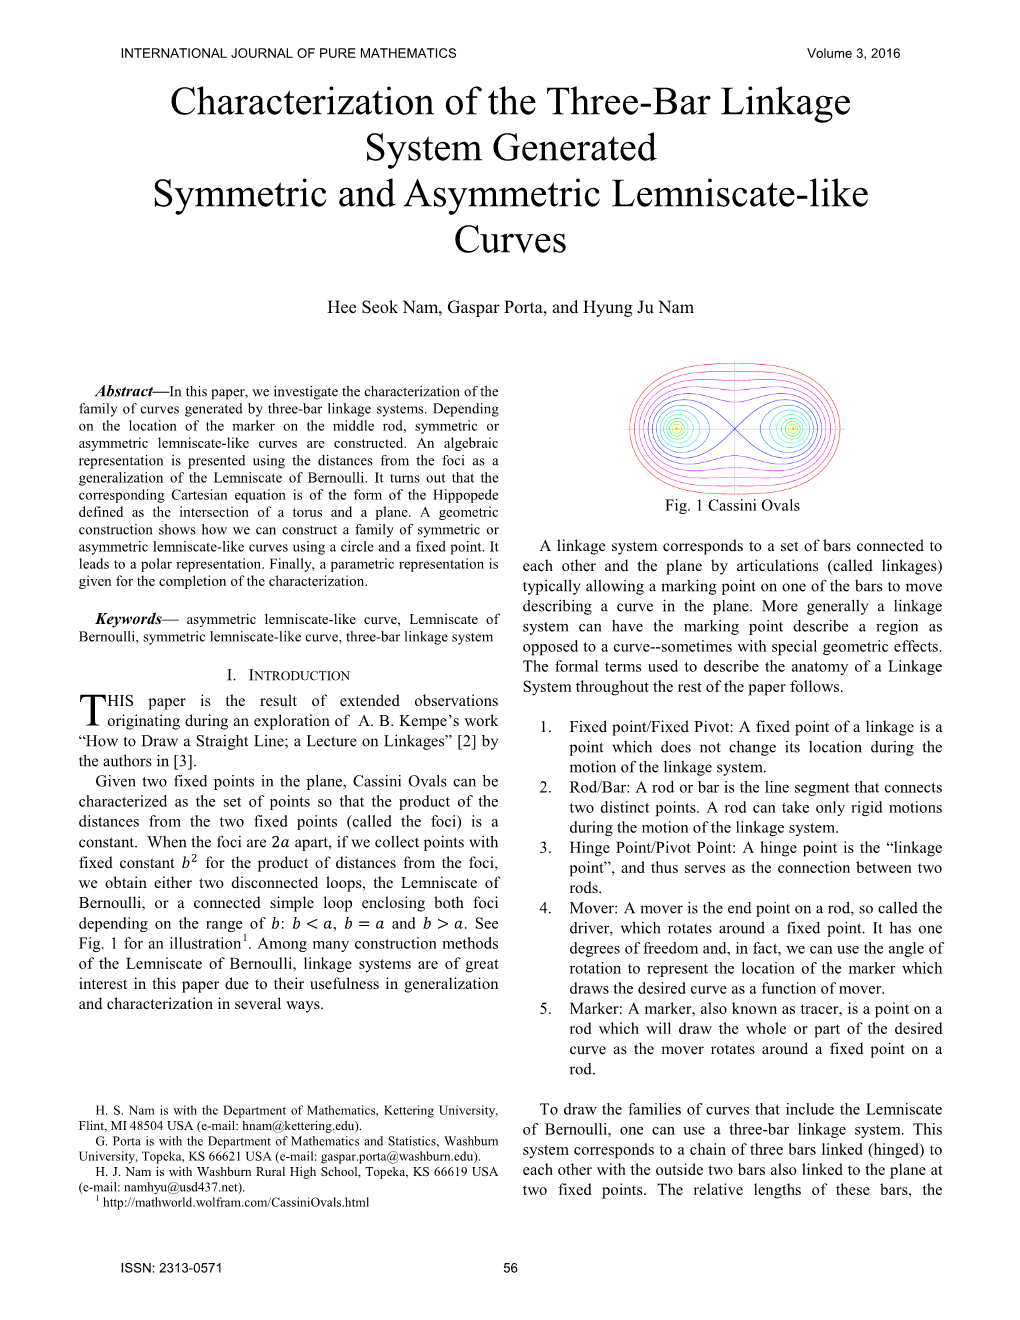 Characterization of the Three-Bar Linkage System Generated Symmetric and Asymmetric Lemniscate-Like Curves